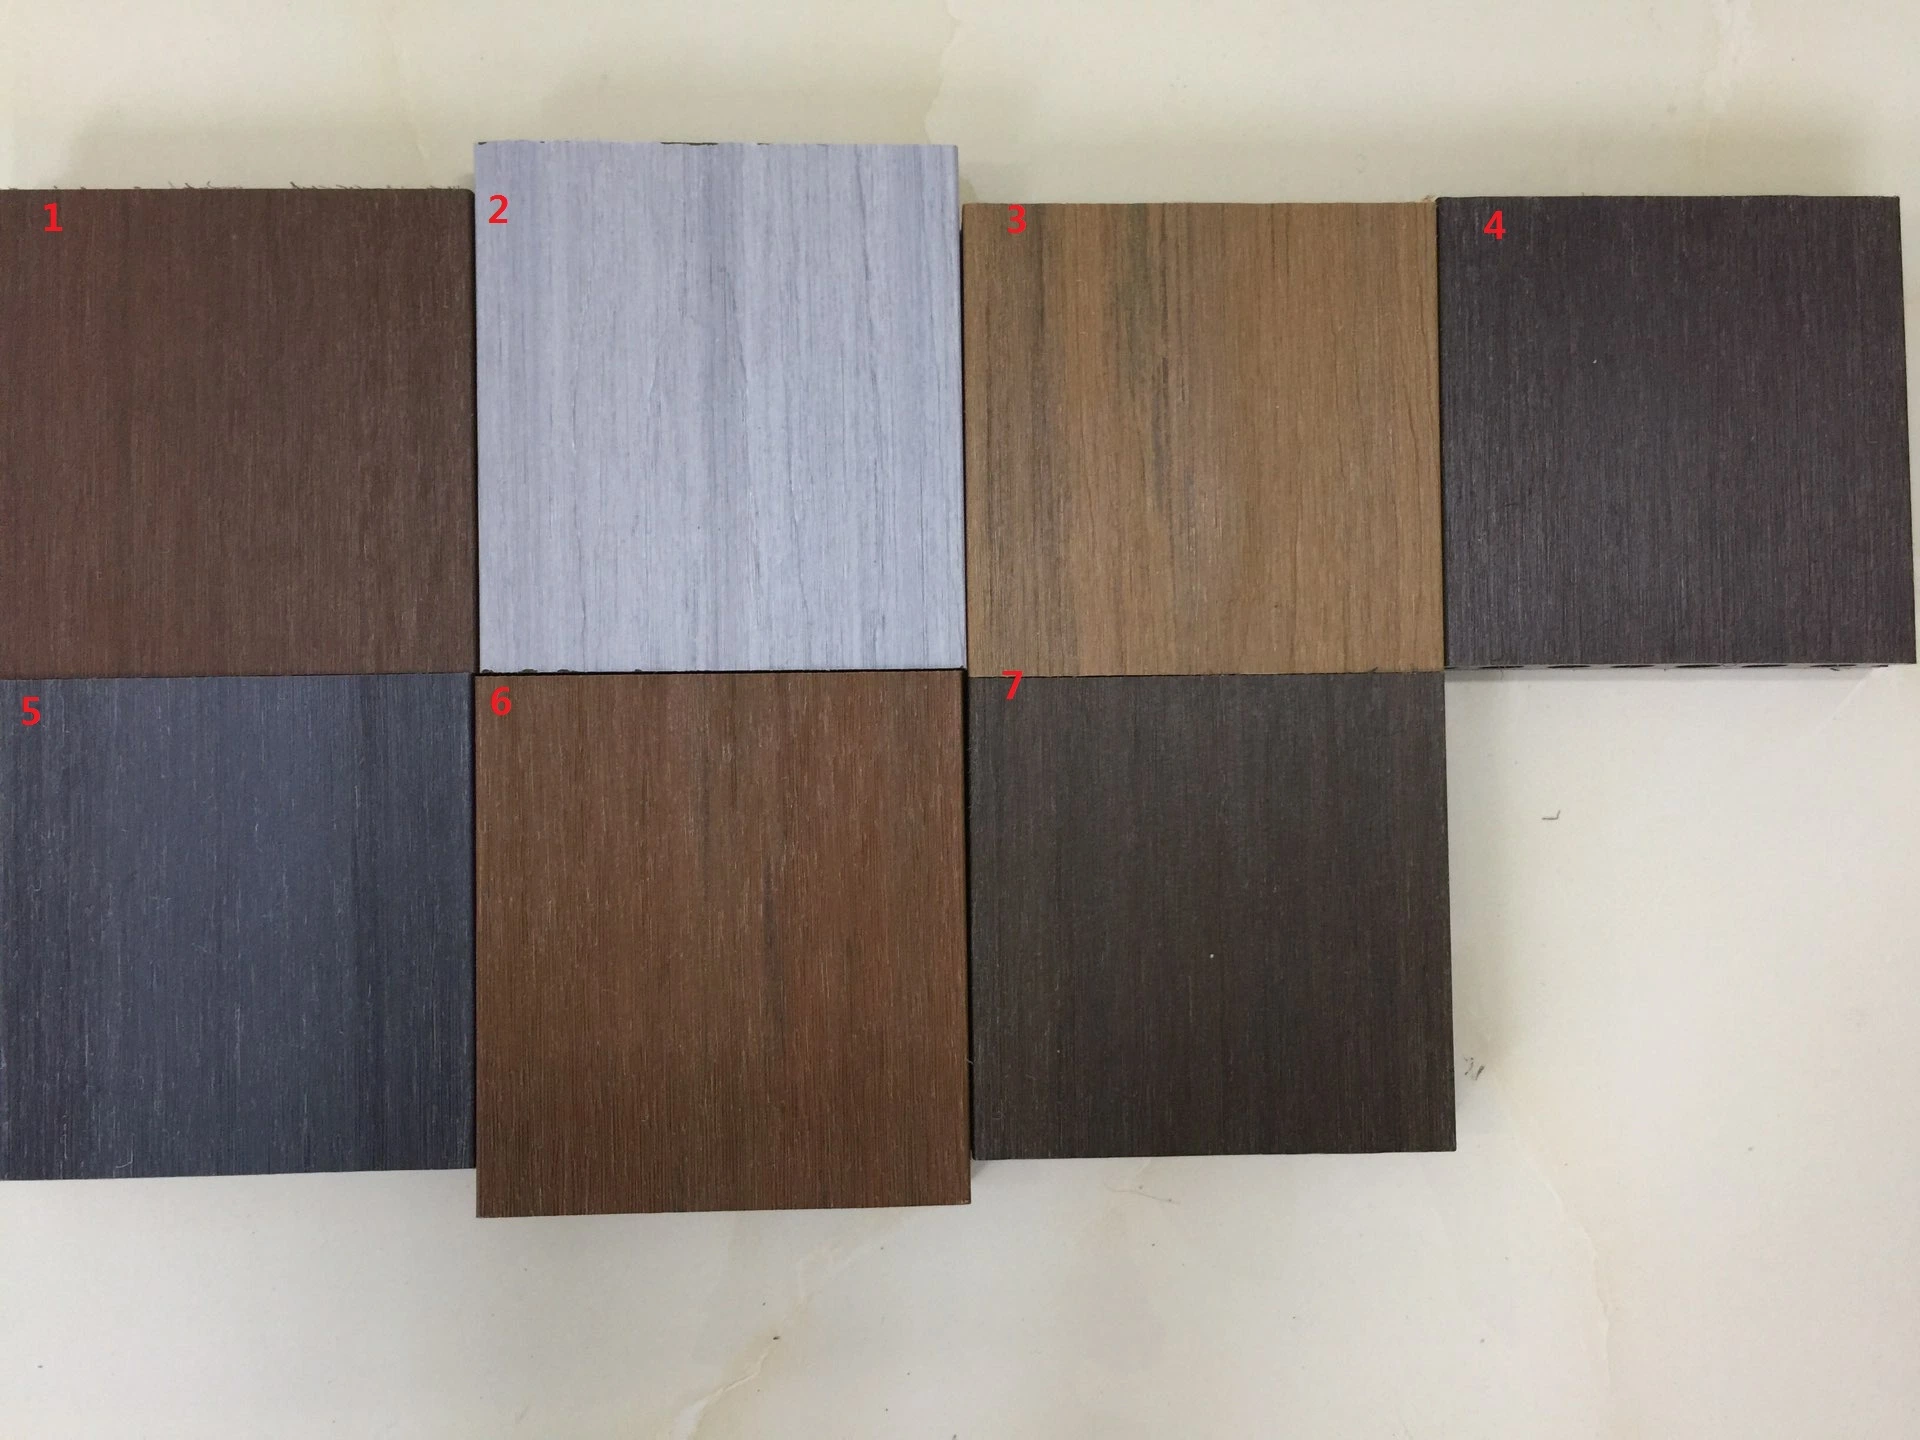 Hollow Co-Extruded Decking WPC Decking Wood Plastic Composite From China with CE